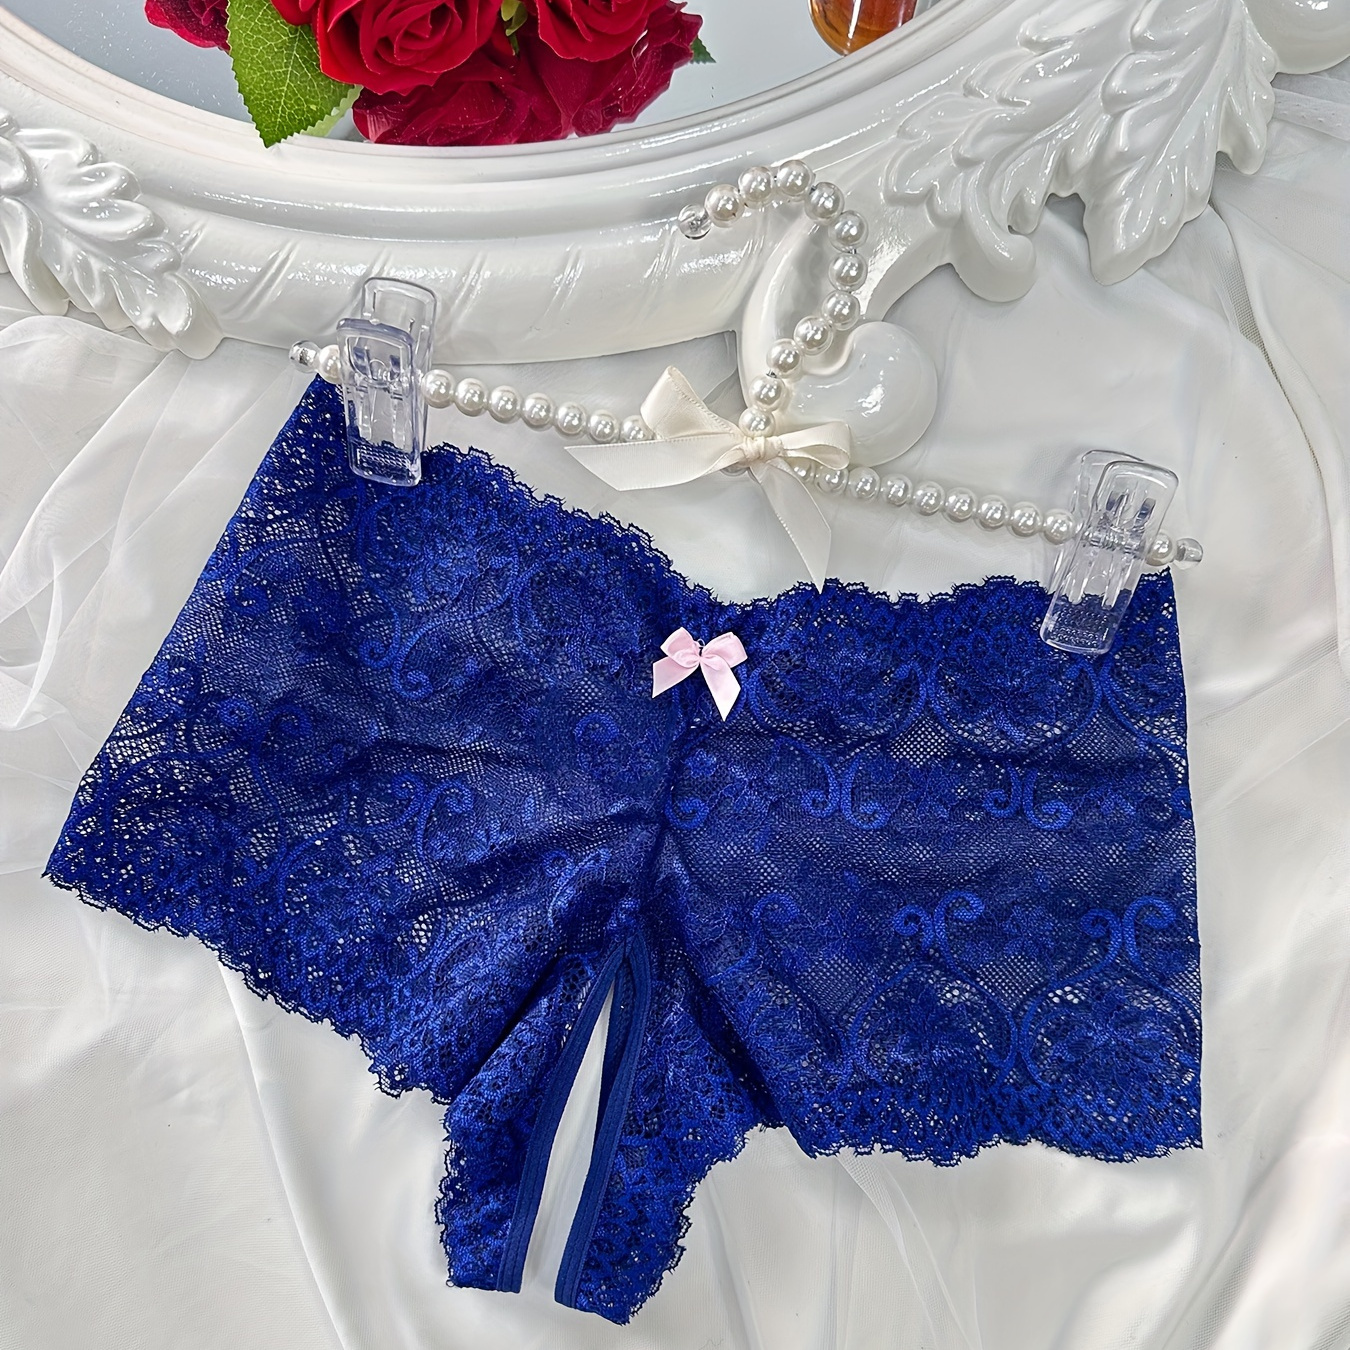 

Floral Lace Briefs, Open Crotch Intimates Panties, Women's Sexy Lingerie & Underwear